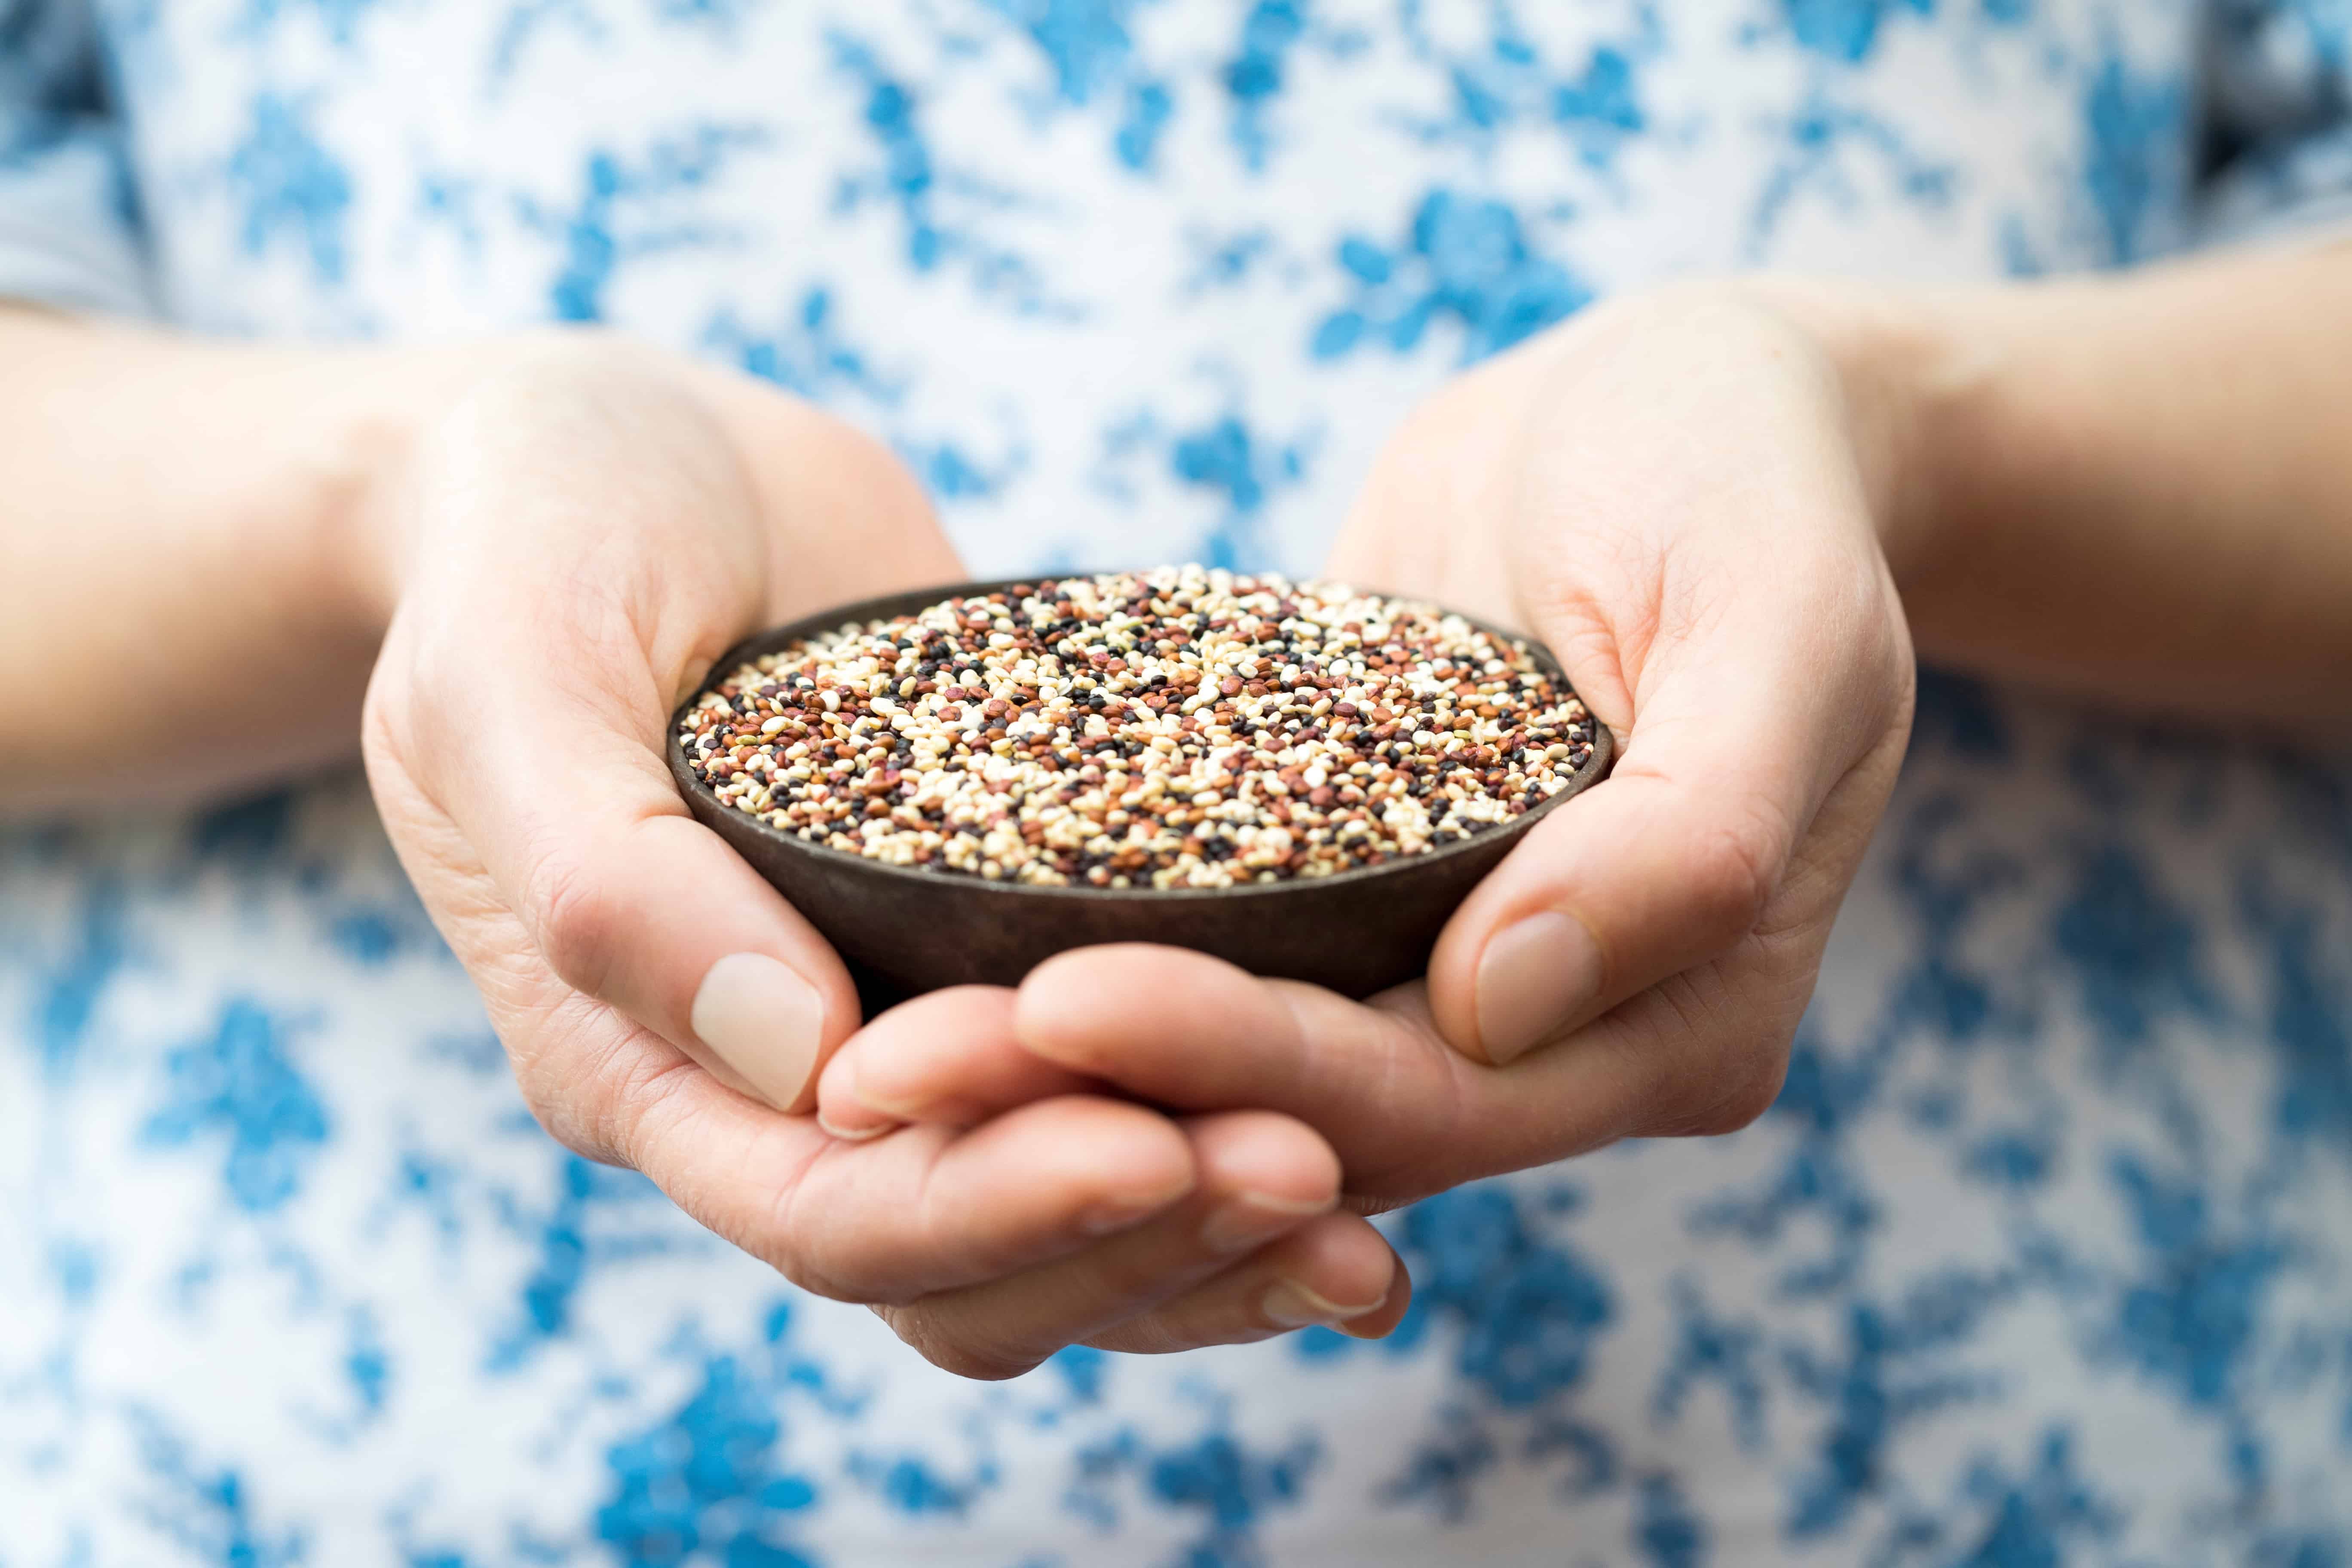 18 Health Benefits Of Quinoa (Including Weight Loss)